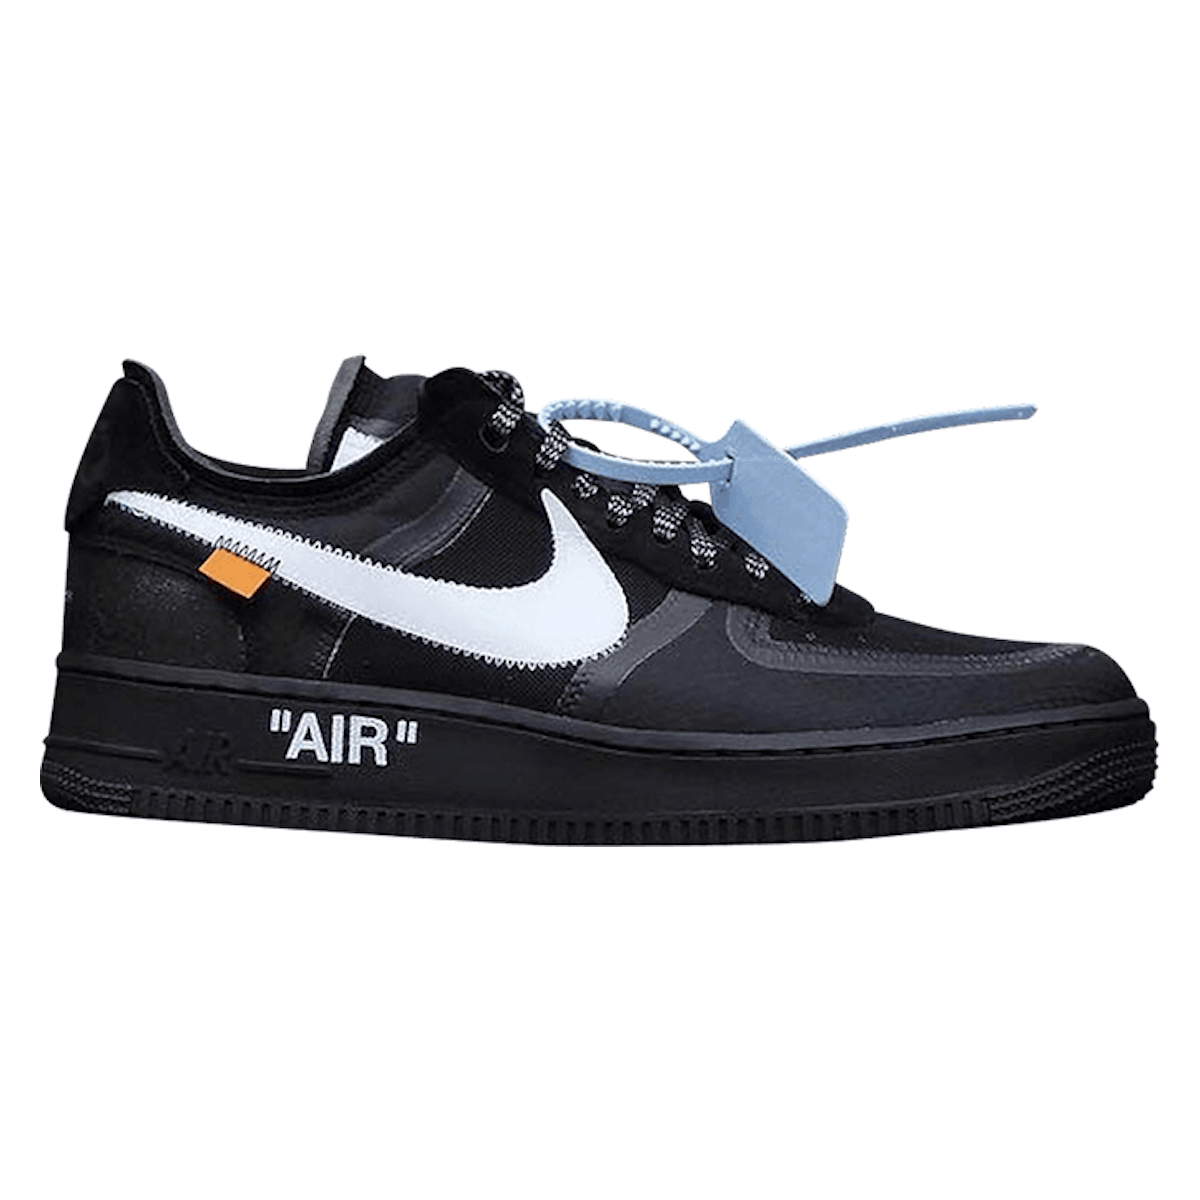 OFF-WHITE x Nike Air Force 1 Low "Black"